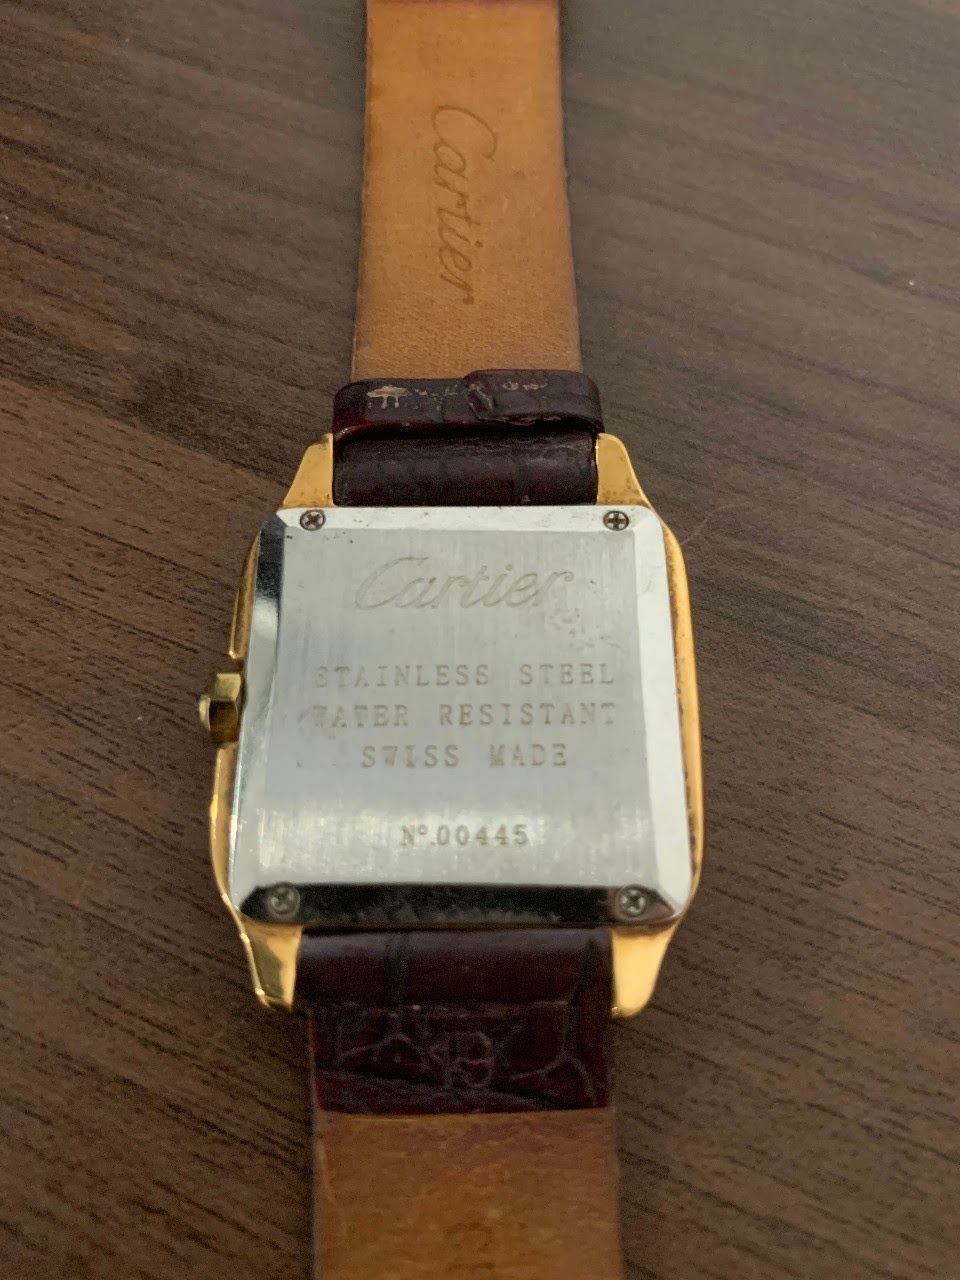 Cartier - Is this a genuine Cartier?